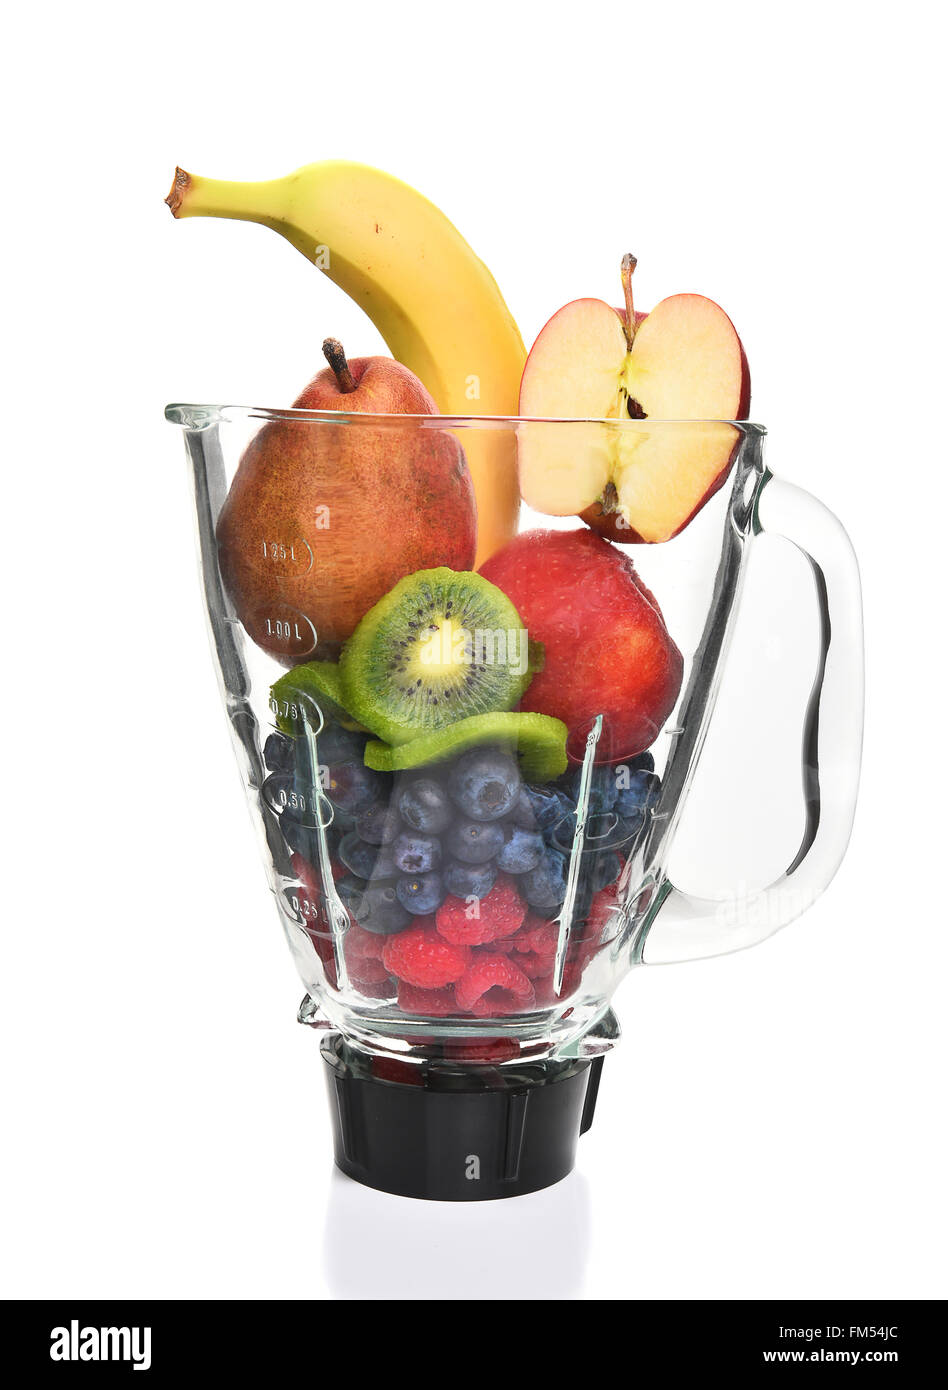 A blender filled with fresh whole fruits for making a smoothie or juice. Healthy eating concept. Stock Photo